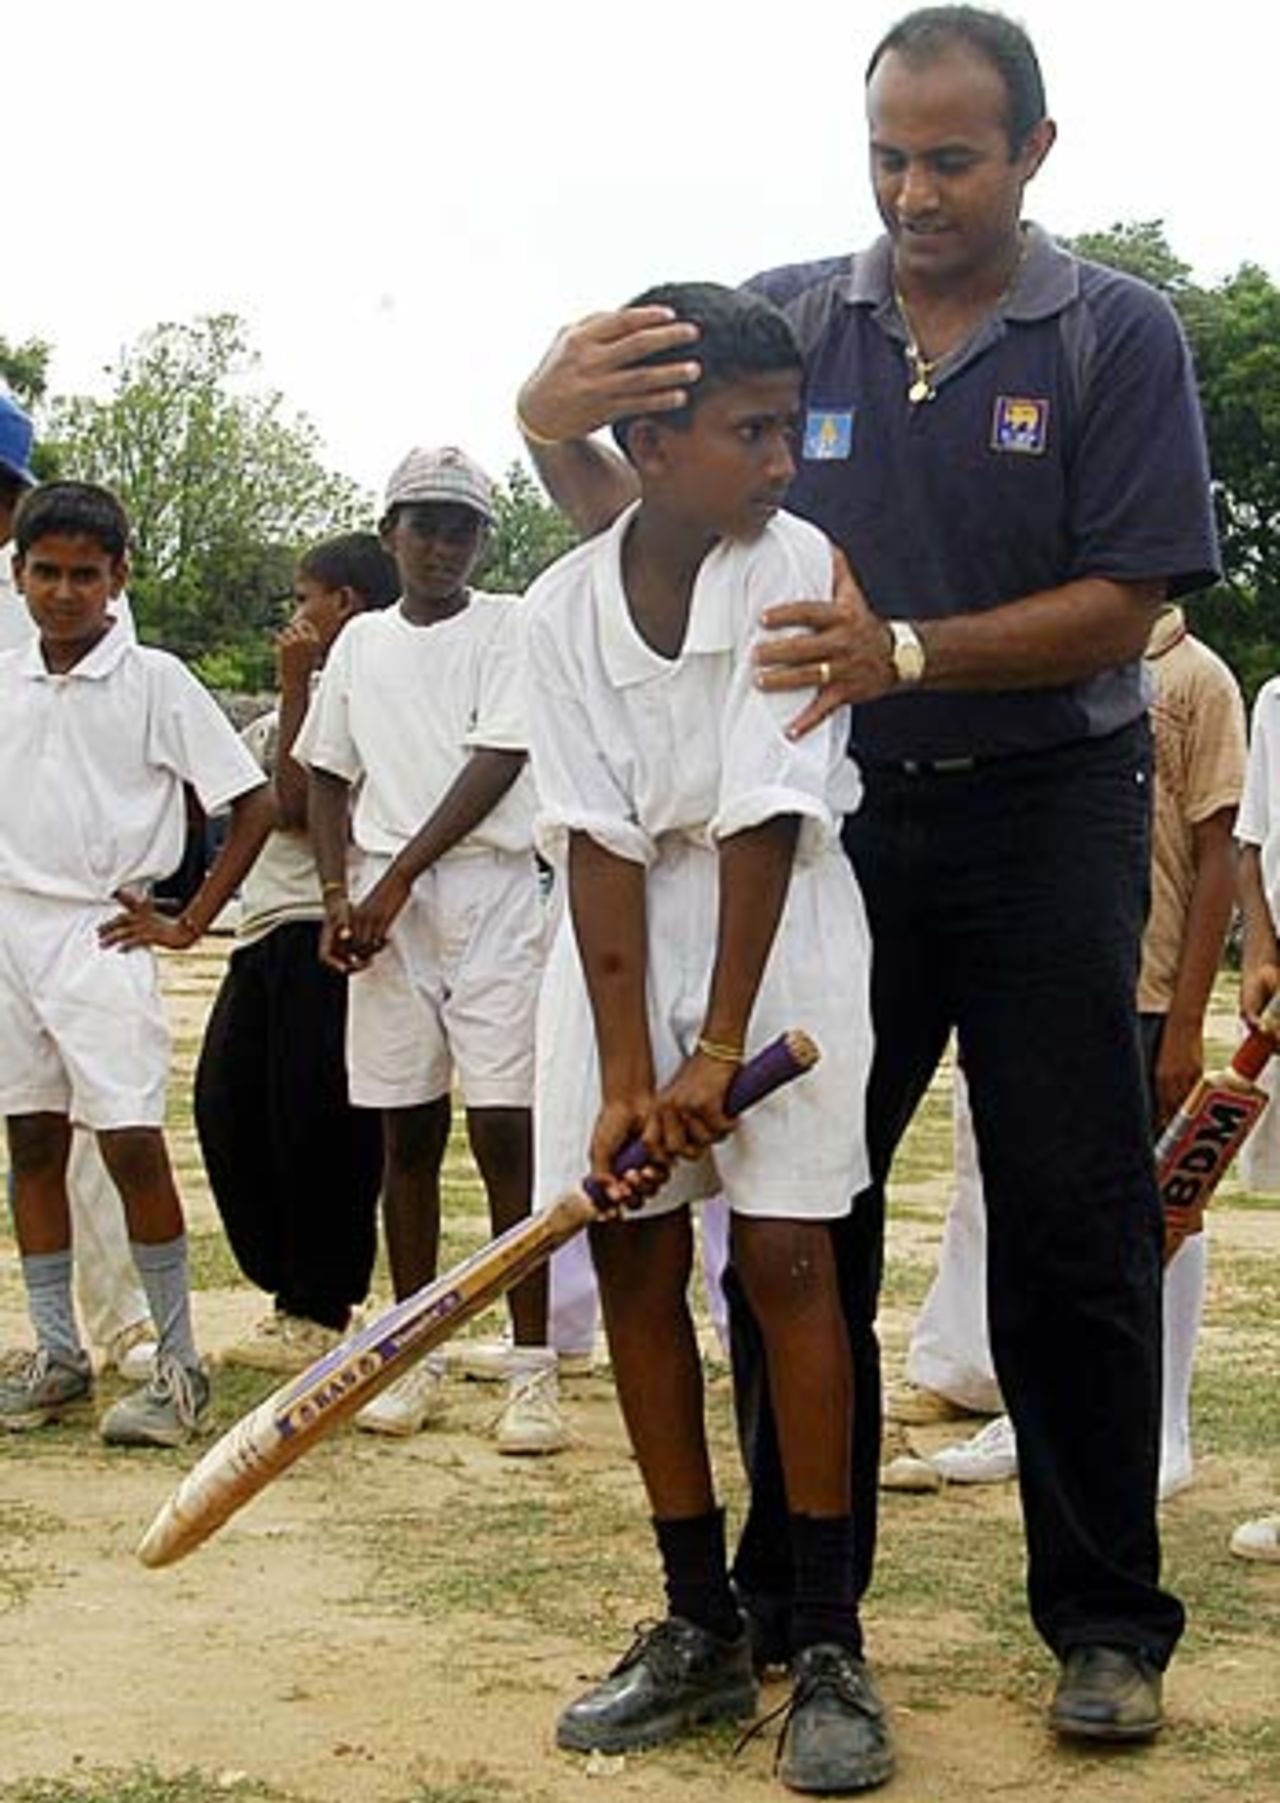 Hashan Tillakaratne coaches a Tamil youngster in the rebel-held town of Kilinochchi in northern Sri Lanka, May 8, 2005